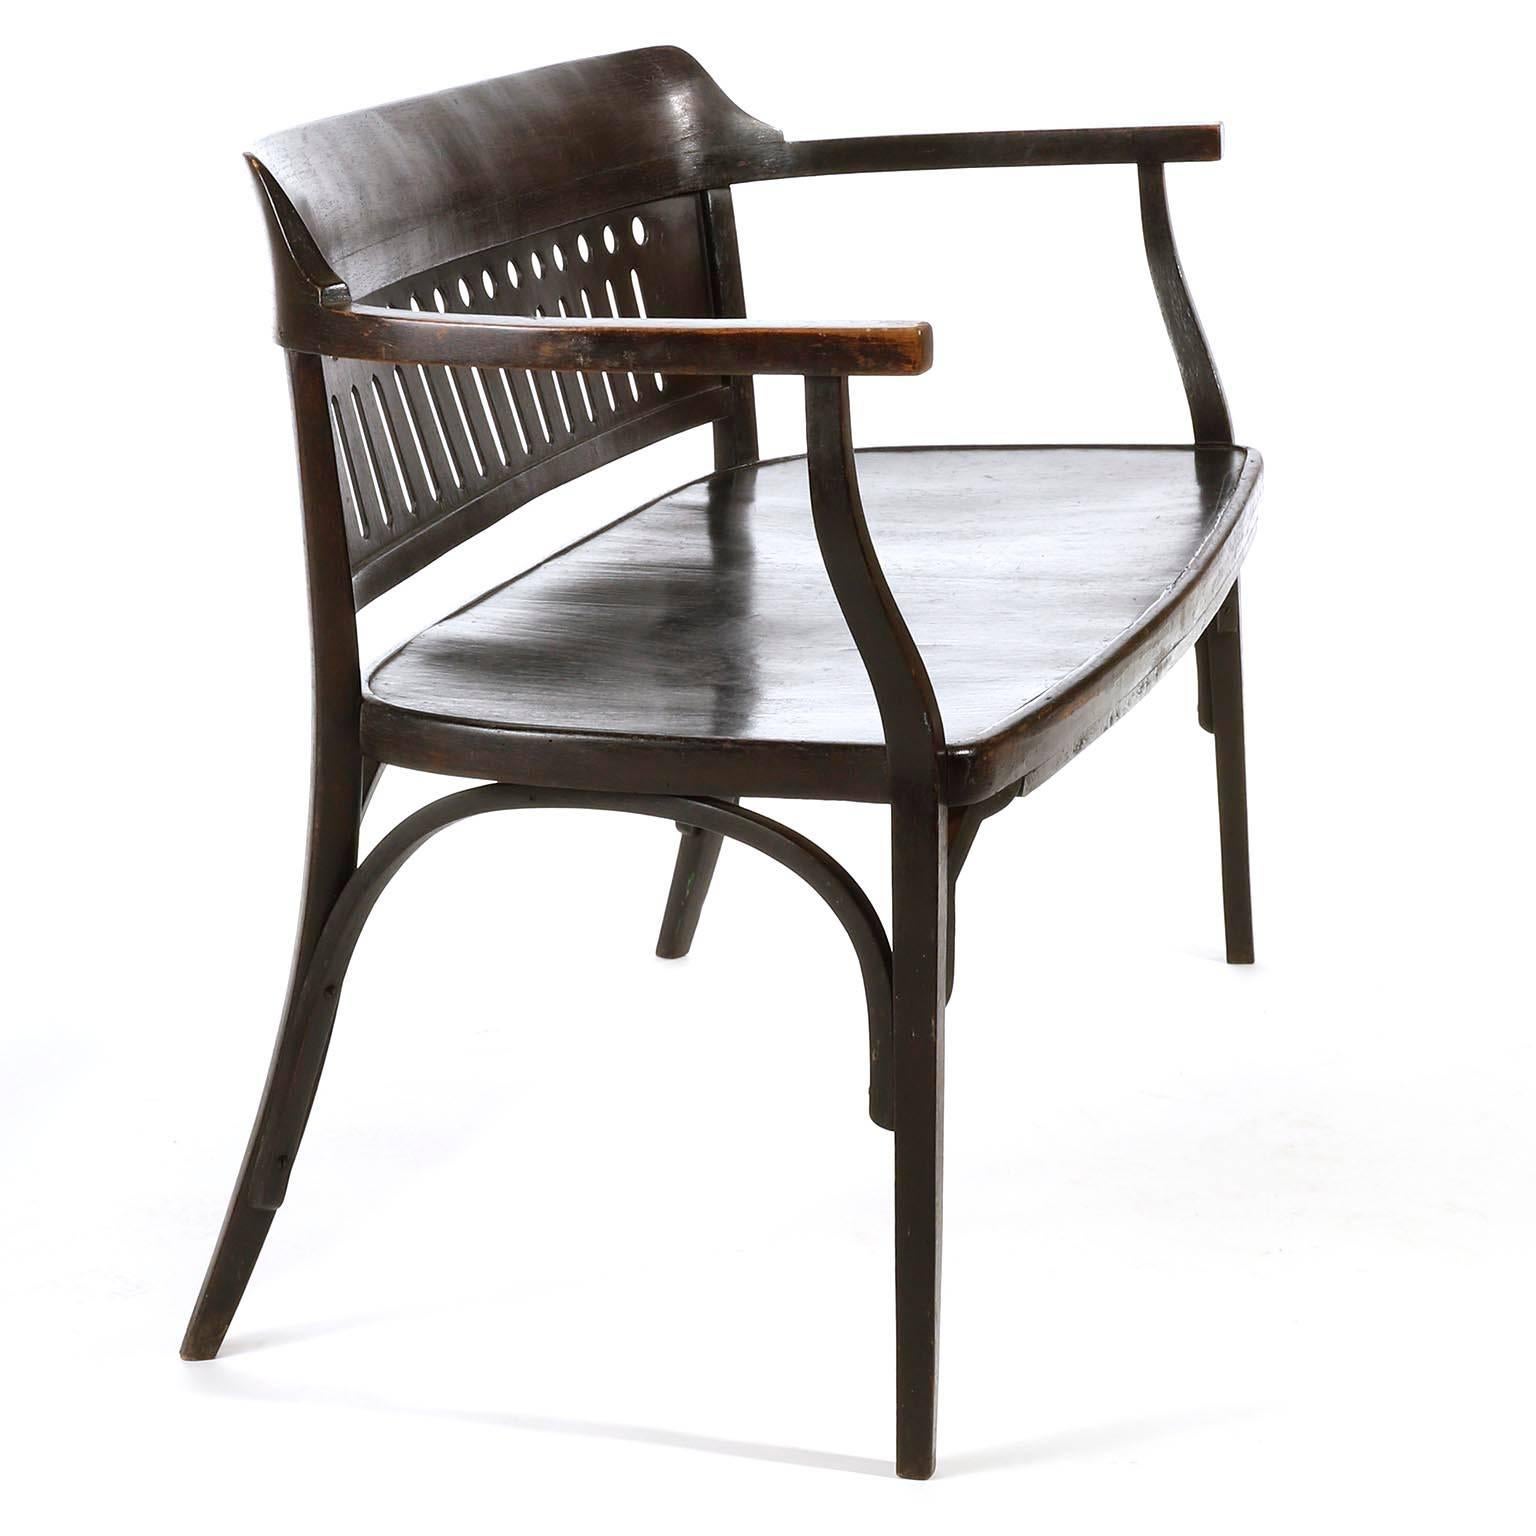 Otto Wagner Settee Bench Bentwood, Thonet, Austria, Vienna Secession, circa 1905 For Sale 1